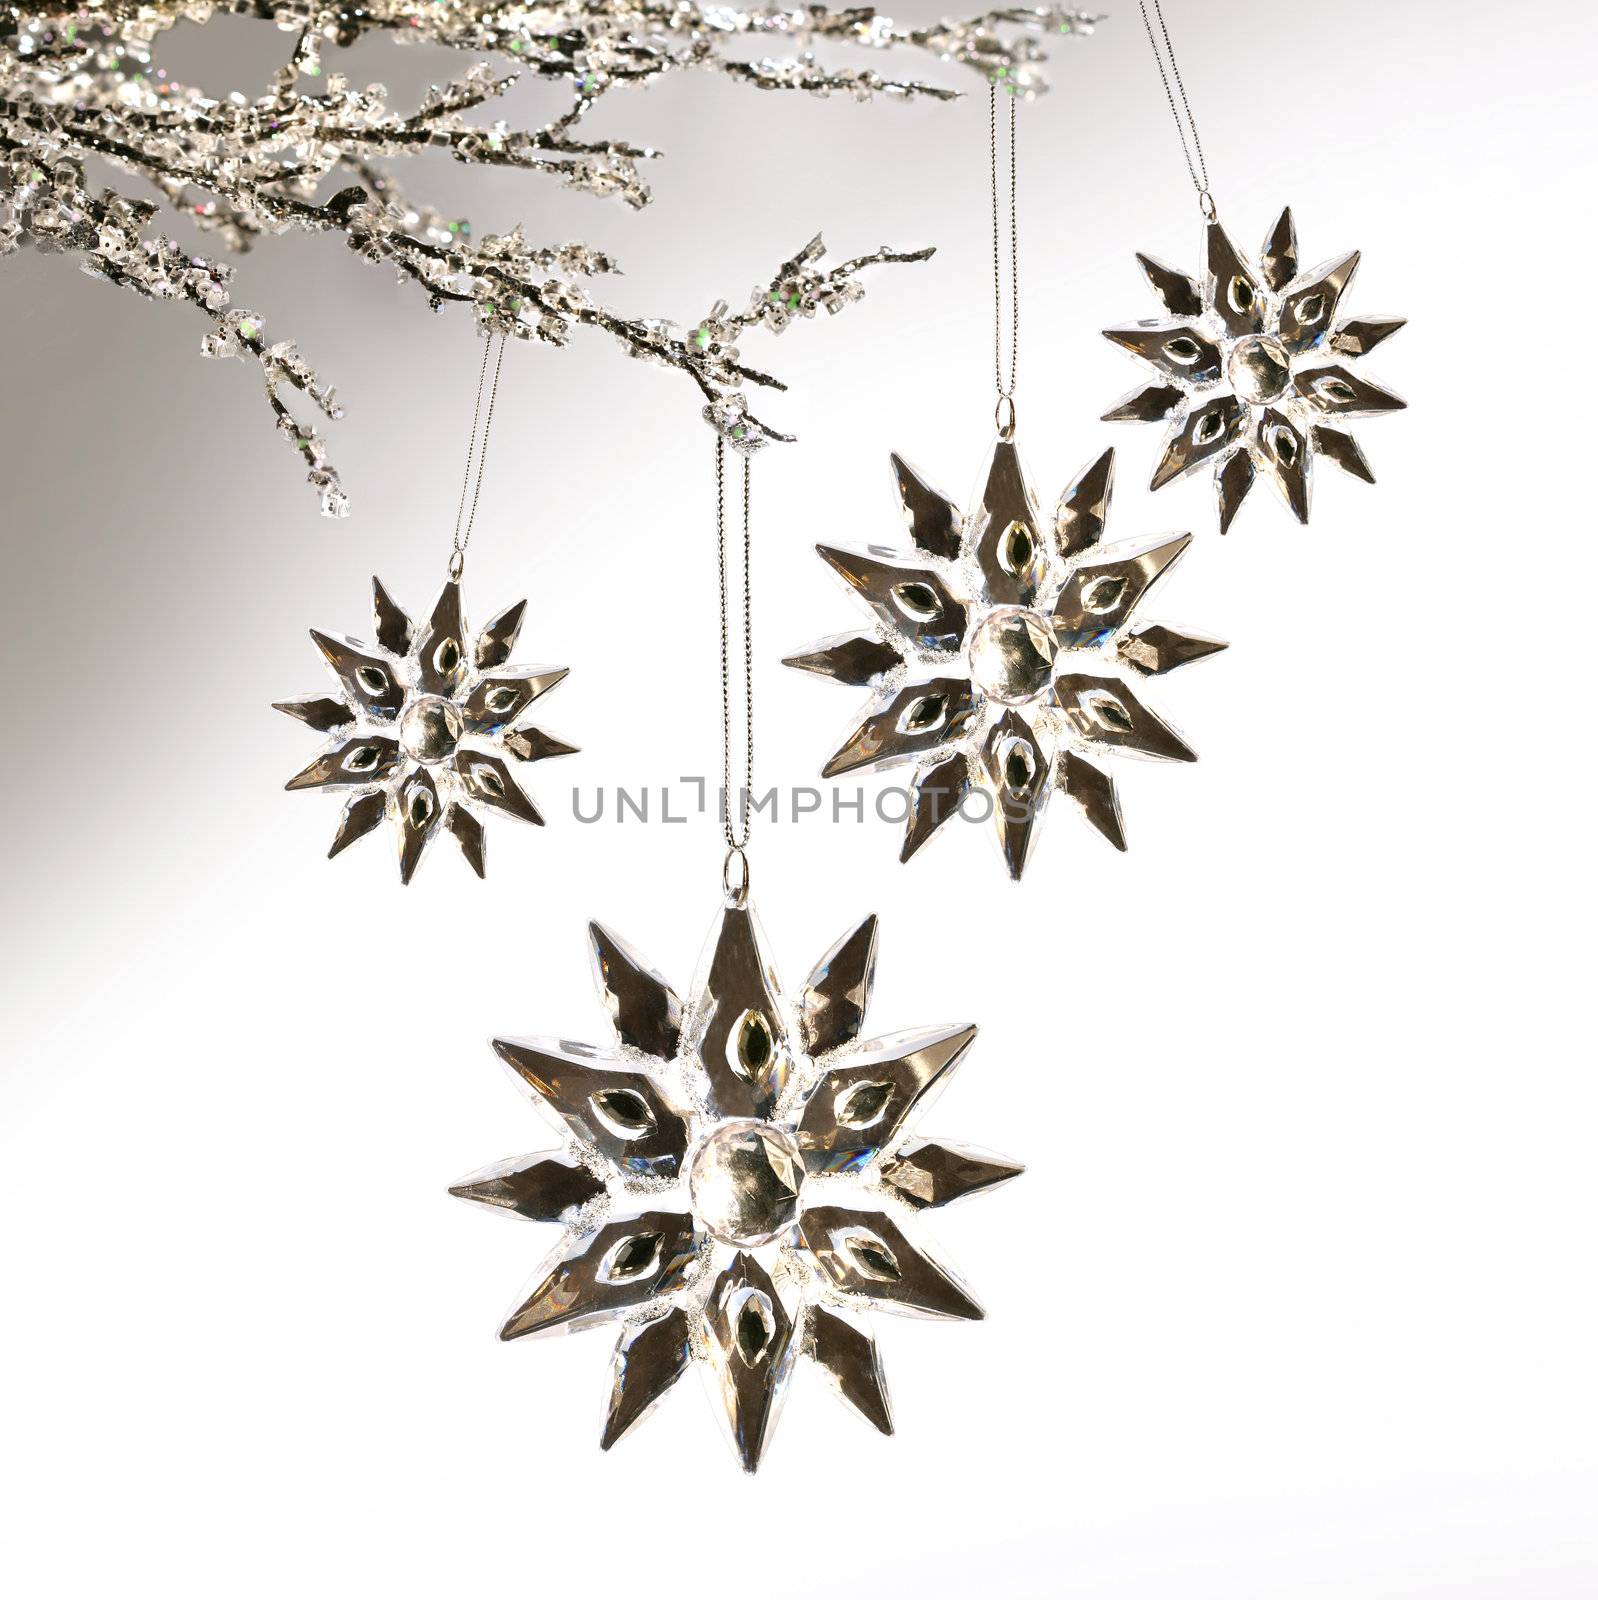 Silver snowflakes hanging against pale grey background